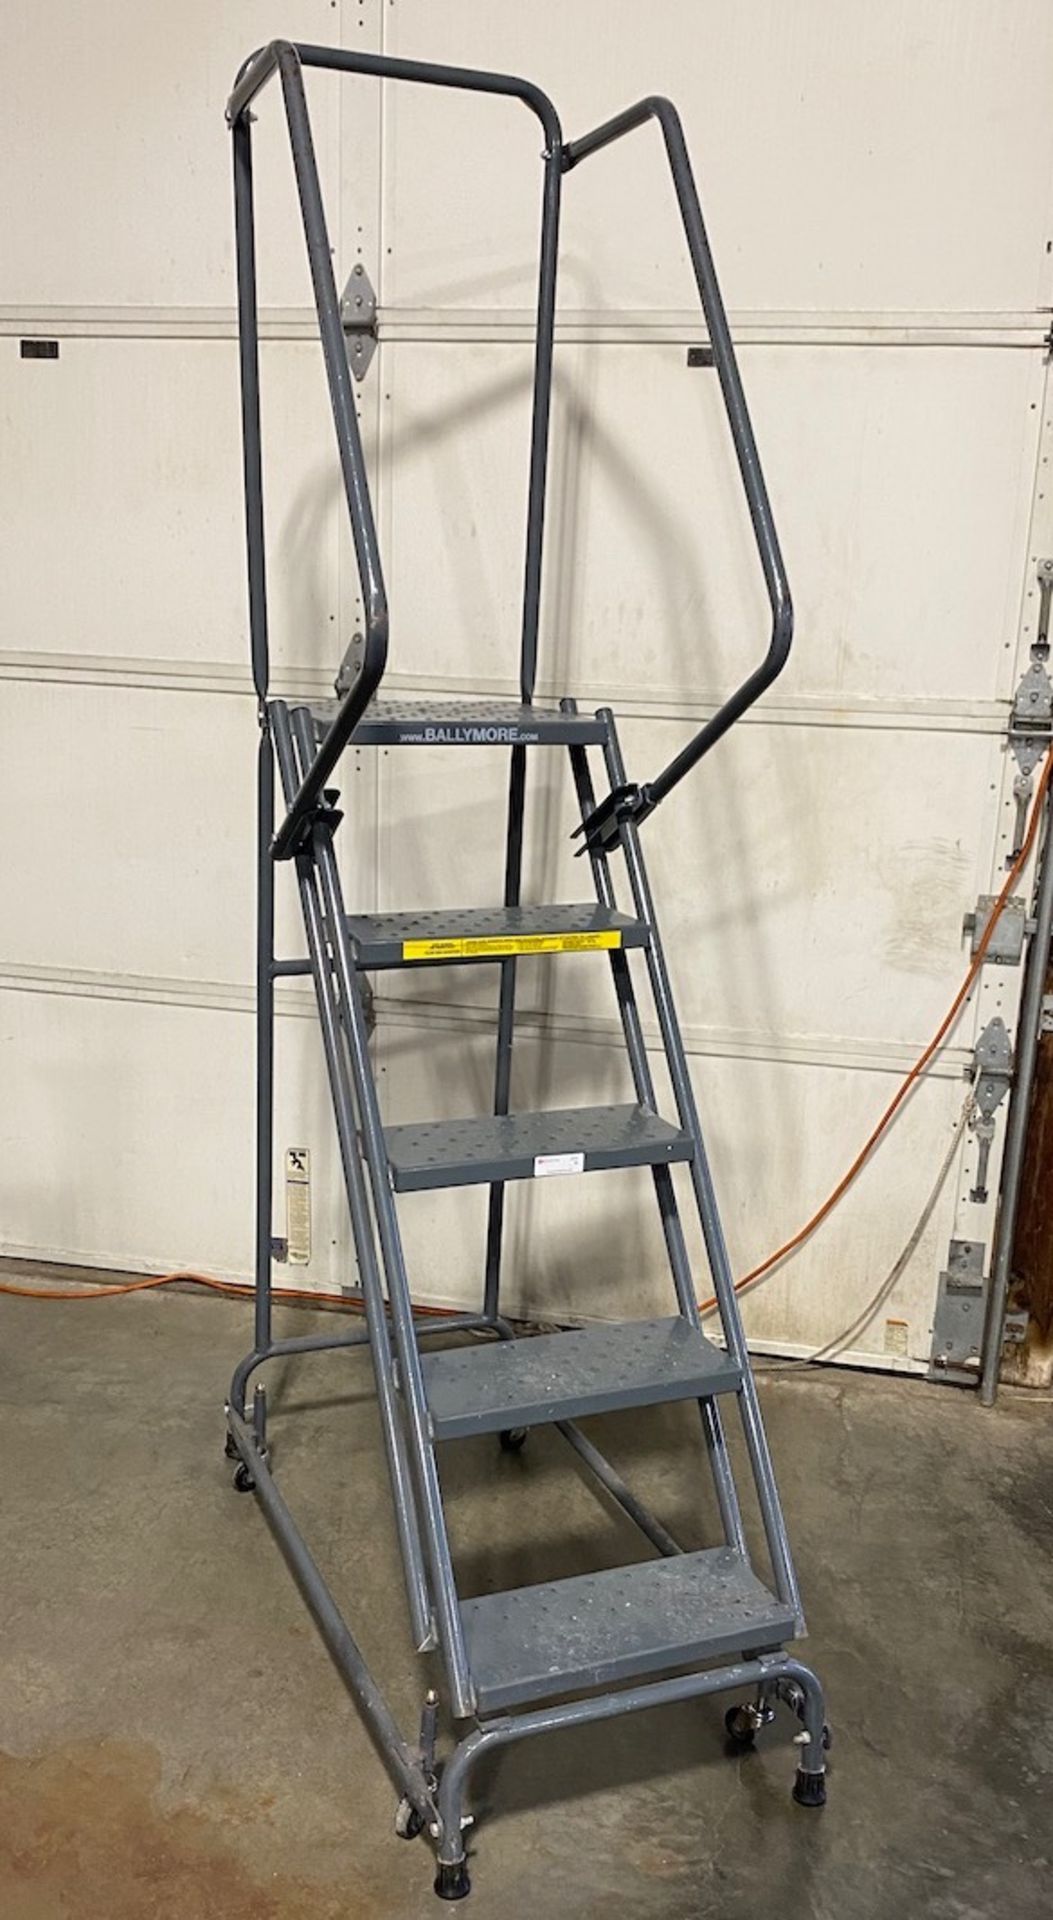 Ballymore five step rolling ladder